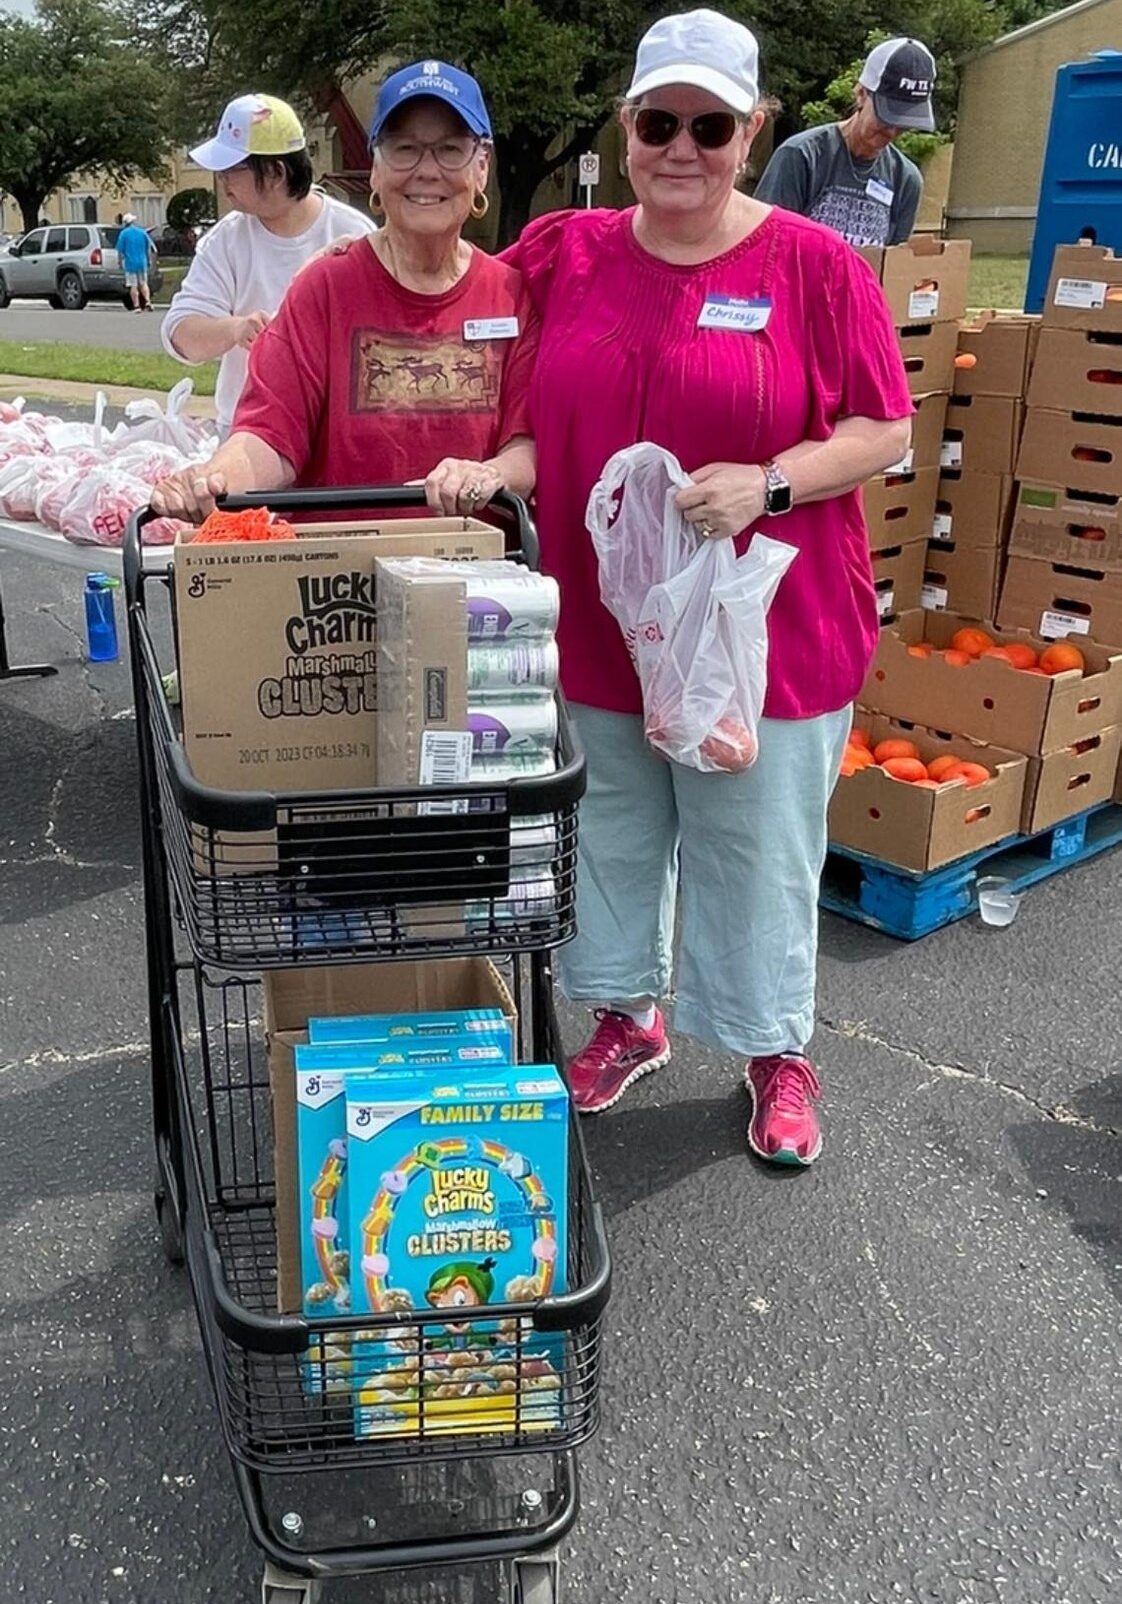 Volunteers with shopping carts